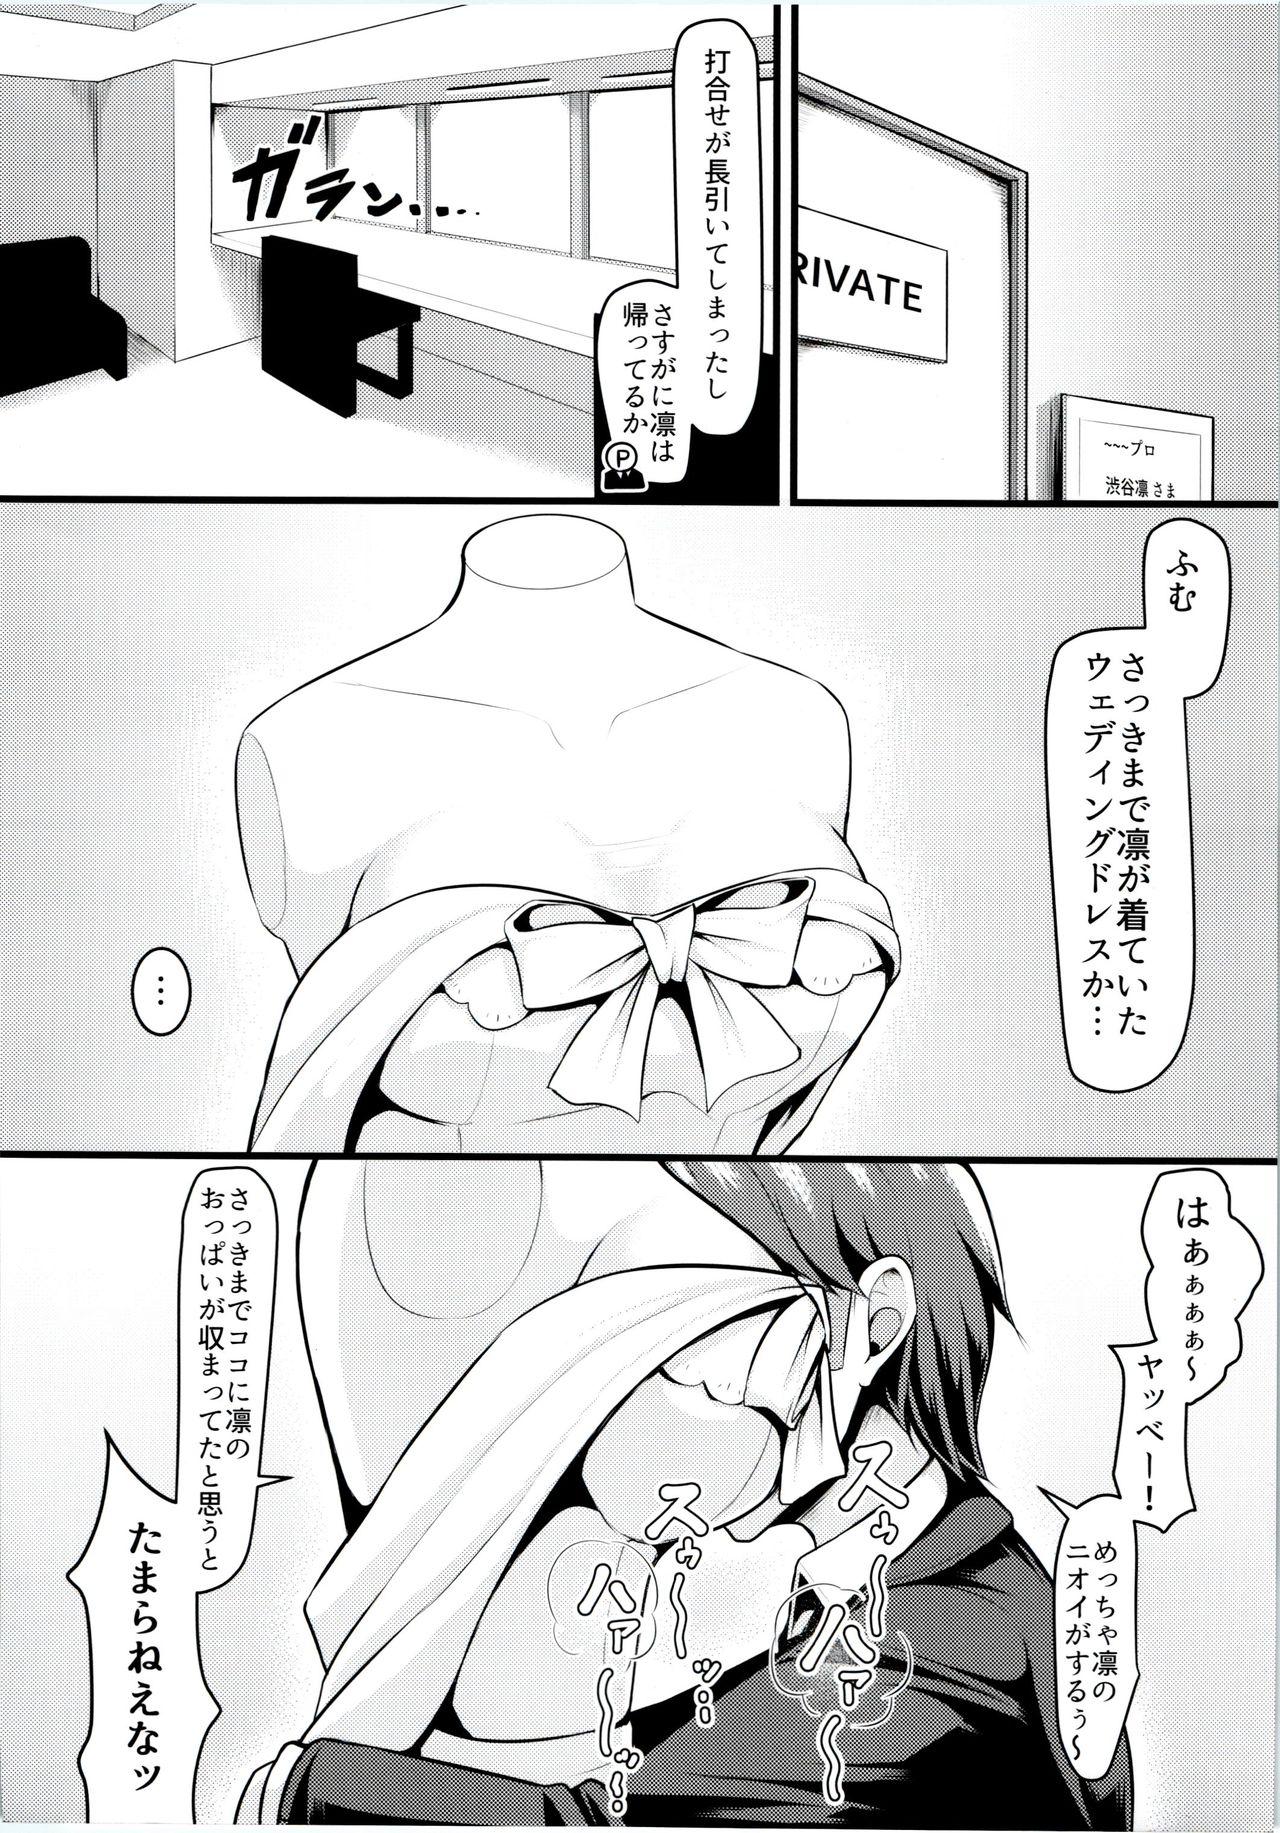 Bottom (Utahime Teien 13) [Lamchat! (Lamcha)] Wed-rin-g! (THE IDOLM@STER CINDERELLA GIRLS) - The idolmaster Oral Sex - Page 5